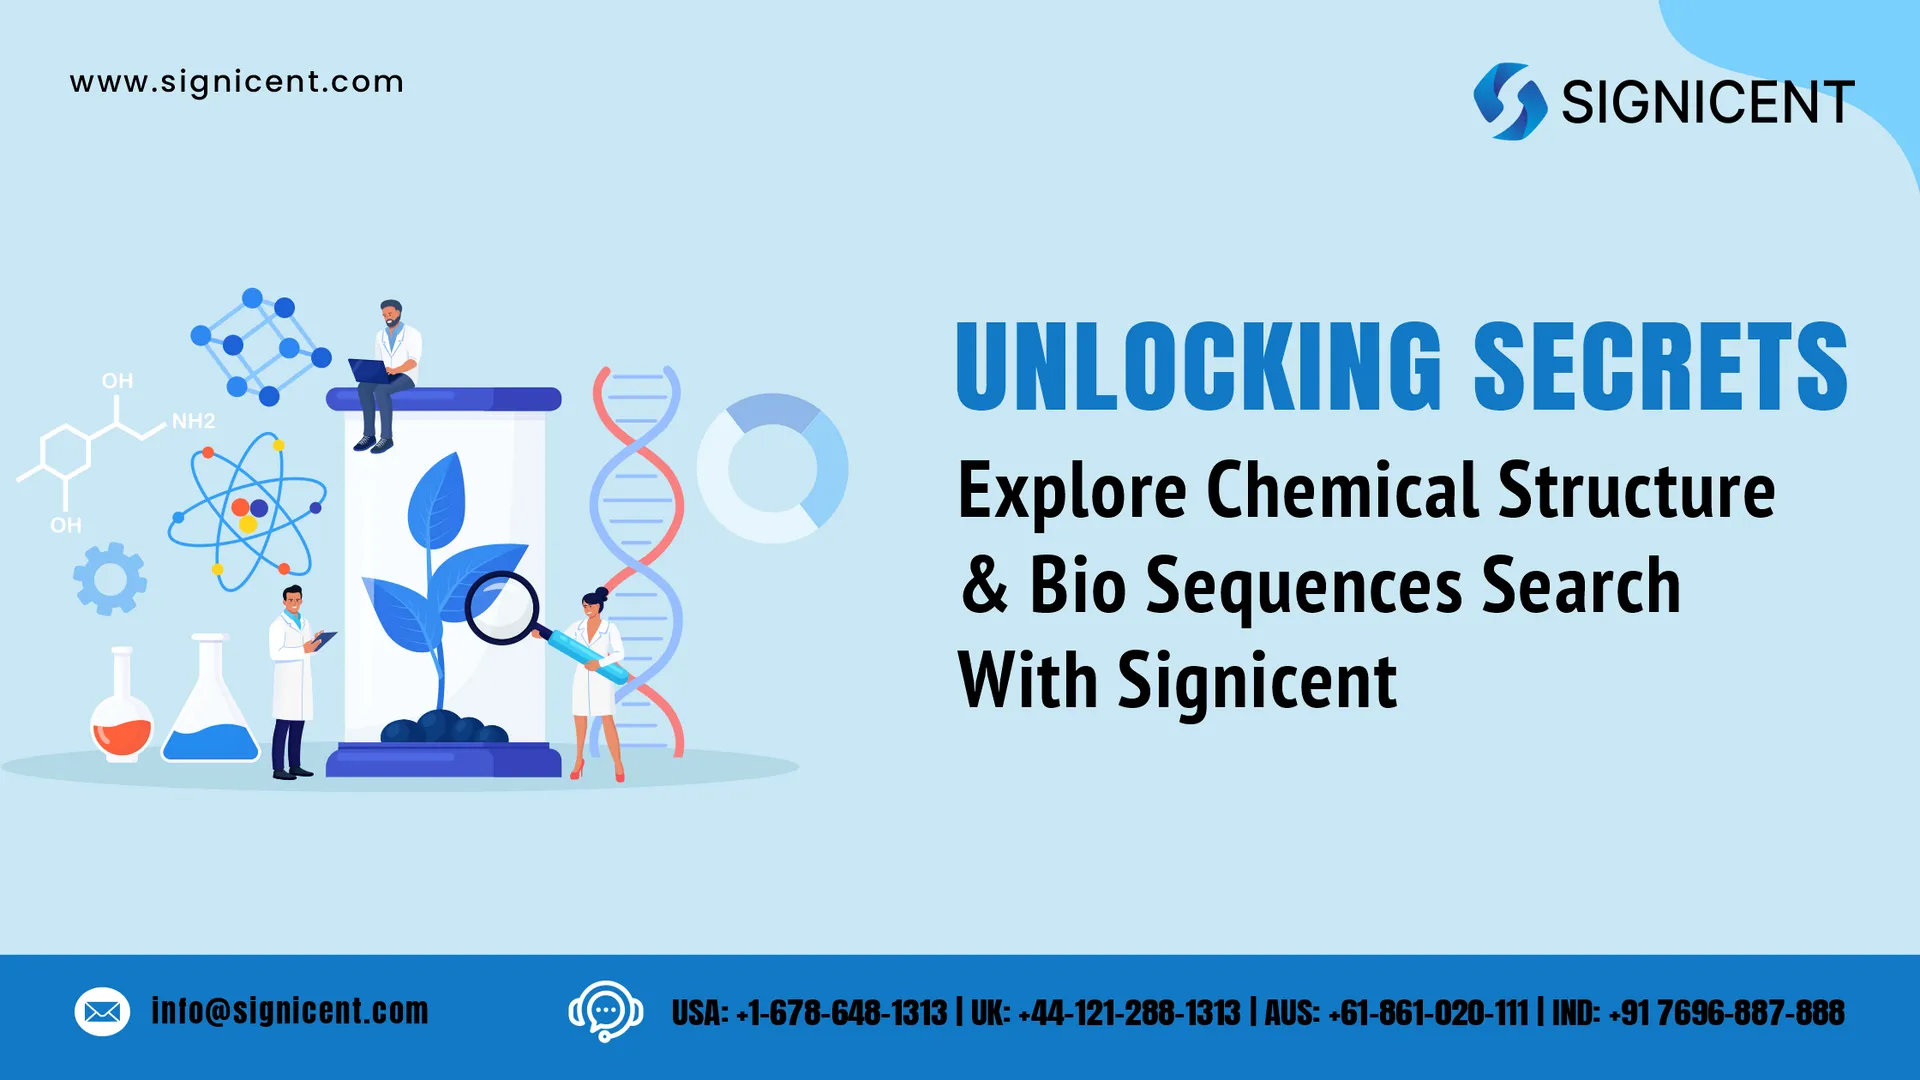 Chemical Structure and Bio Sequence Search | Signicent LLP

https://signicent.com/chemical-structure-bio-sequence-search/

When it comes to Chemical Structure and Bio Sequence Search, Signicent is your trusted partner.
Our expertise helps you find specific compounds, even if they're entirely new or have complex names. For biological sequence searches, we excel at locating unique DNA, RNA, peptide, or protein sequences in patents. Whether you prefer free or paid databases, Signicent delivers expertly refined results in a professional report. Visit now for more details.